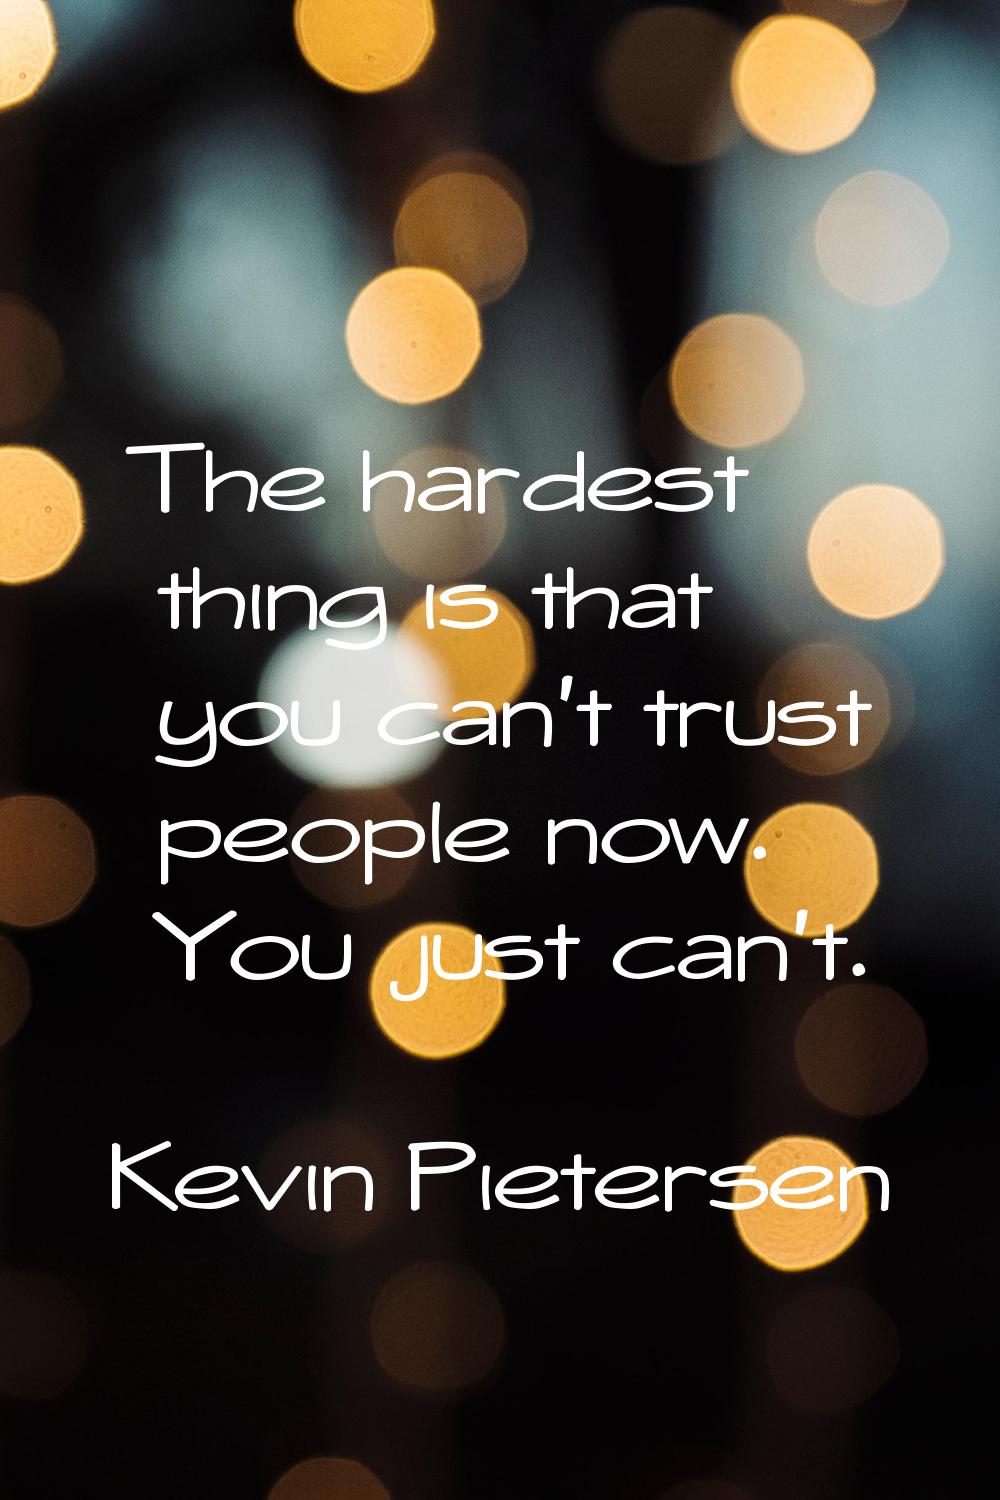 The hardest thing is that you can't trust people now. You just can't.